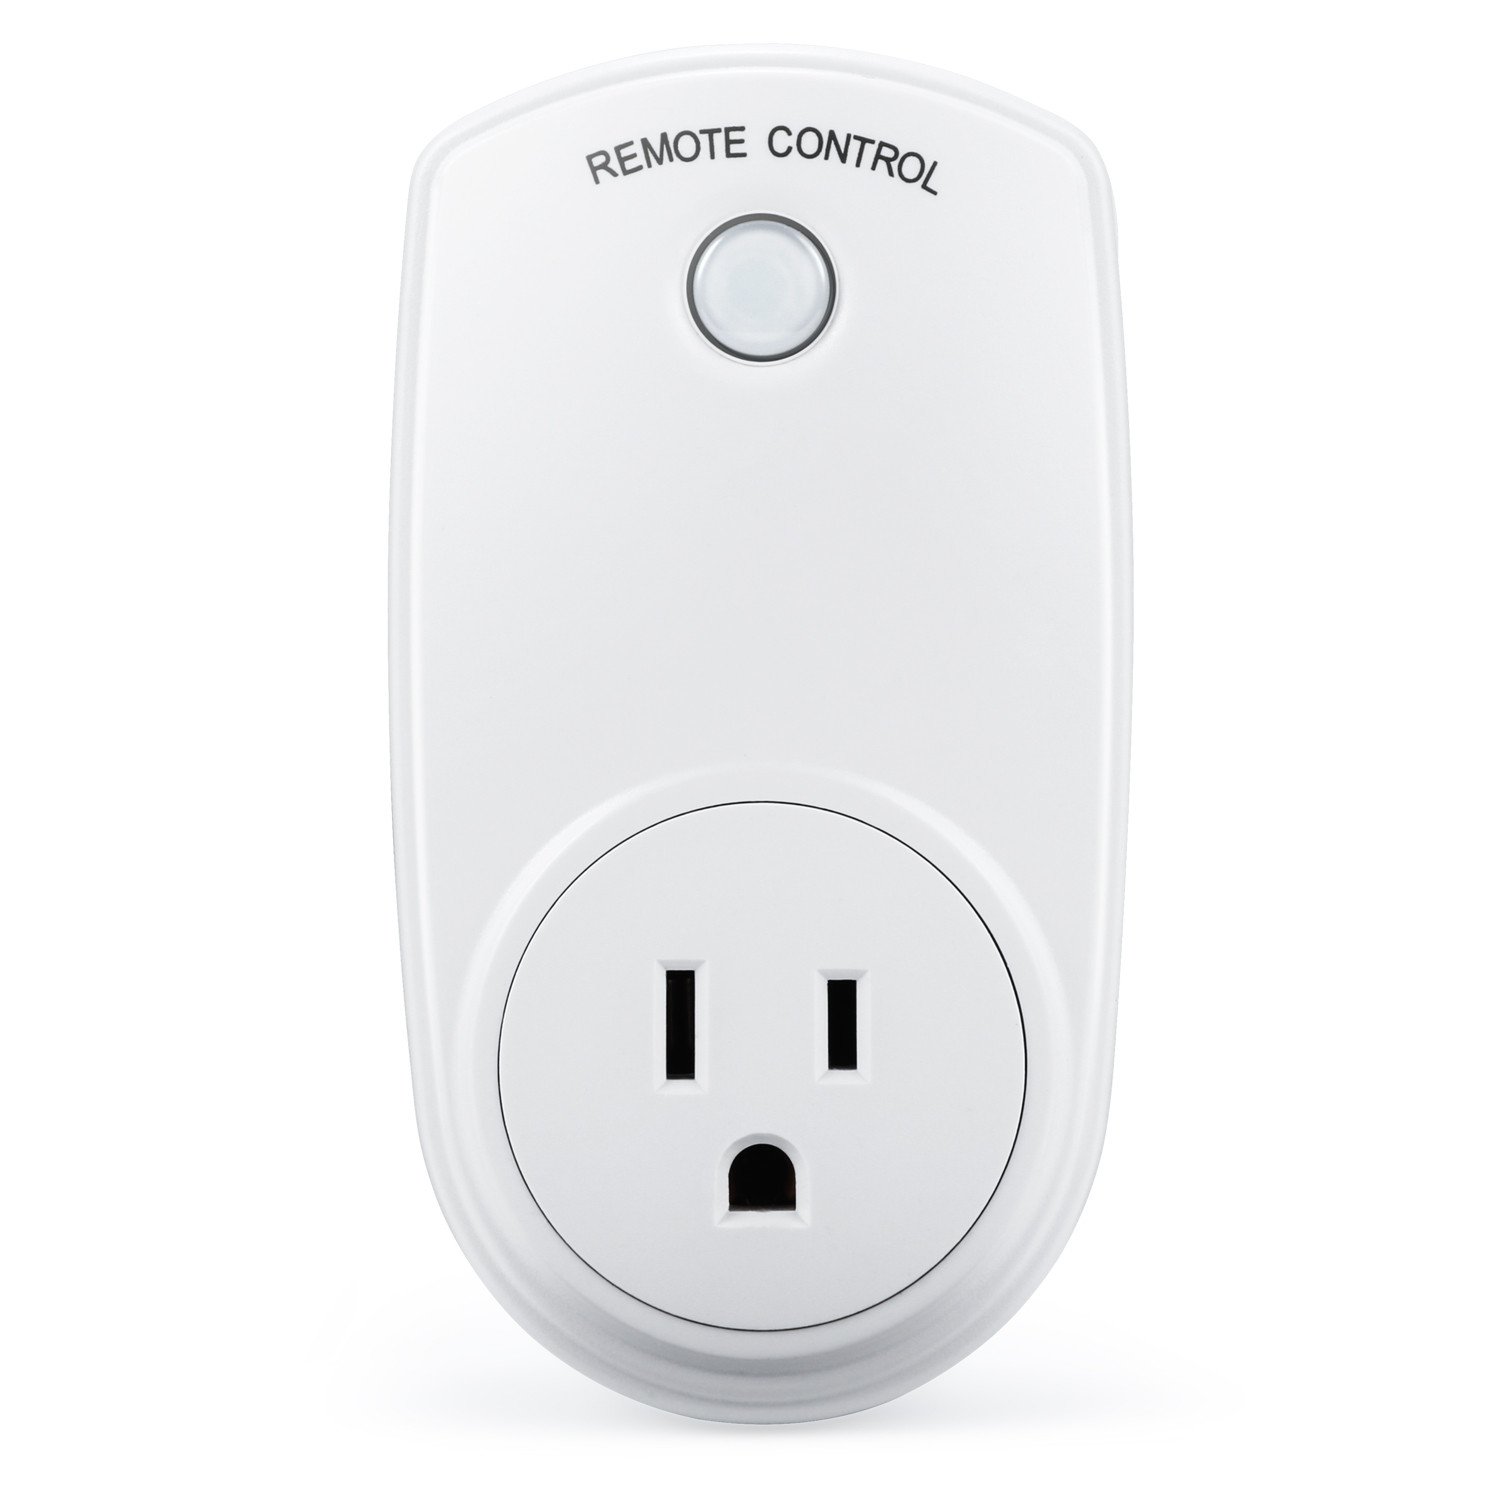 Magicfly Remote Control Electrical Outlet Switch, White (1 Outlet, 1 ...